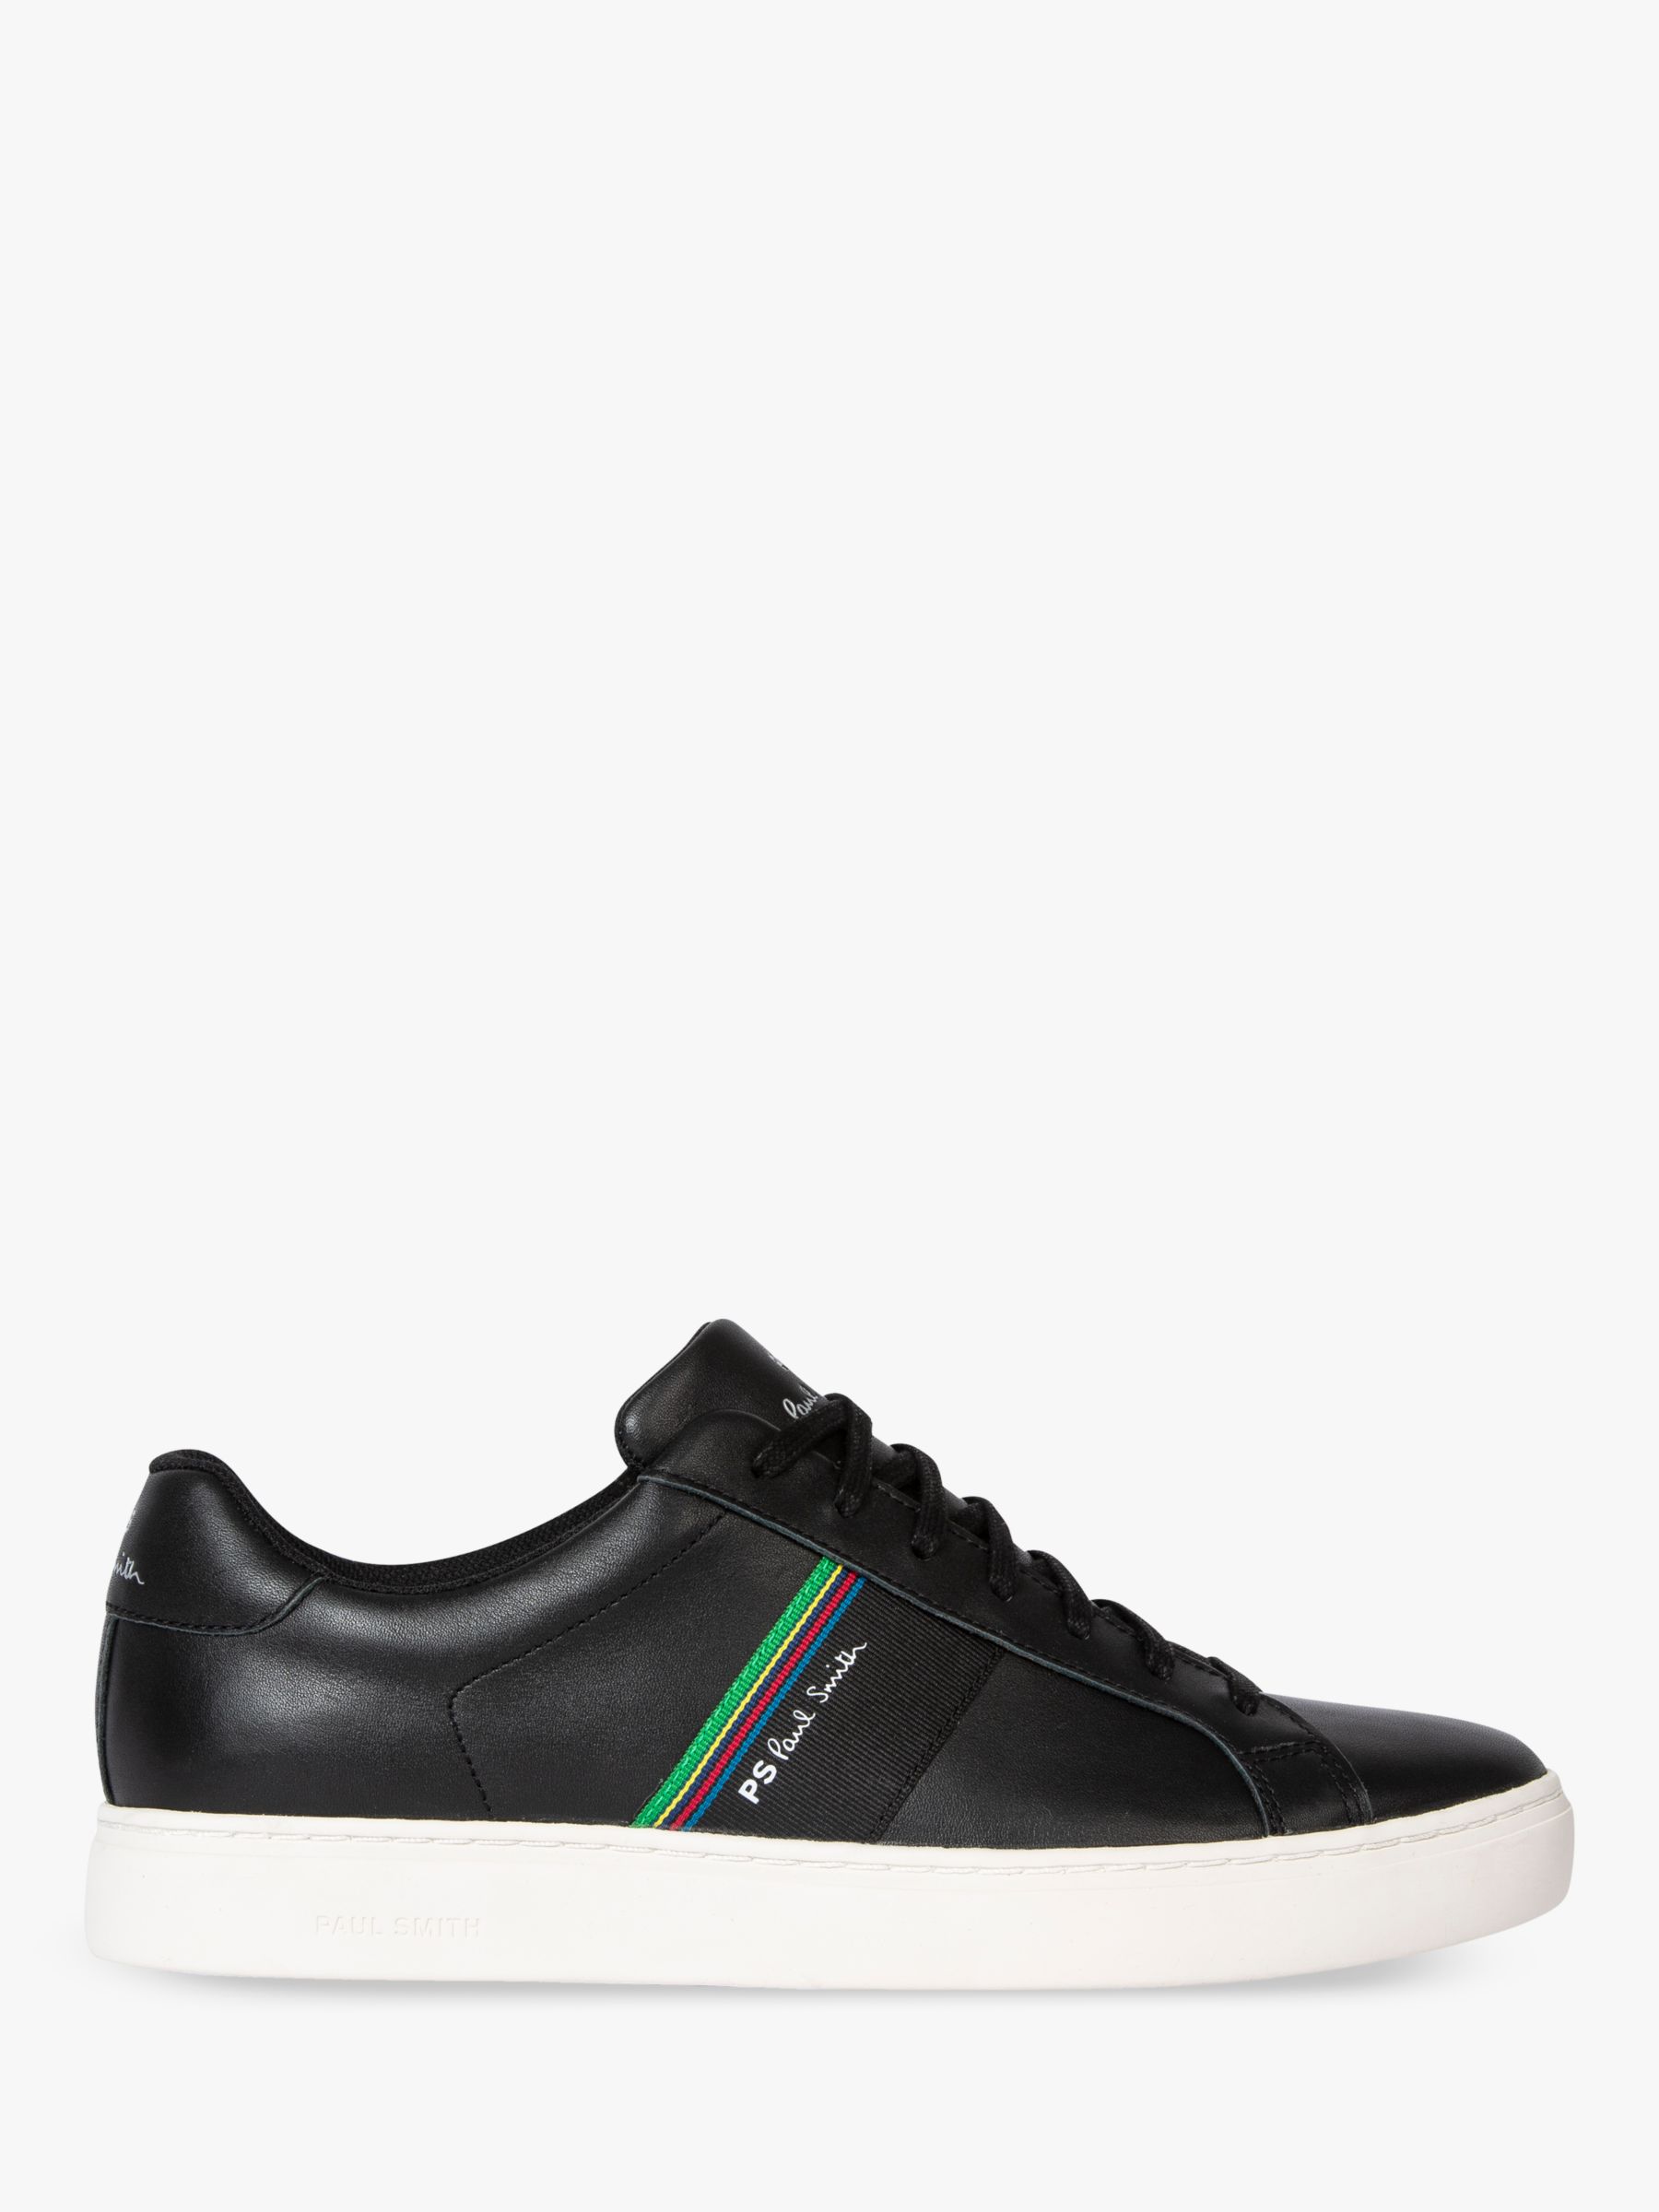 PS Paul Smith Rex Leather Trainers, Black at John Lewis & Partners